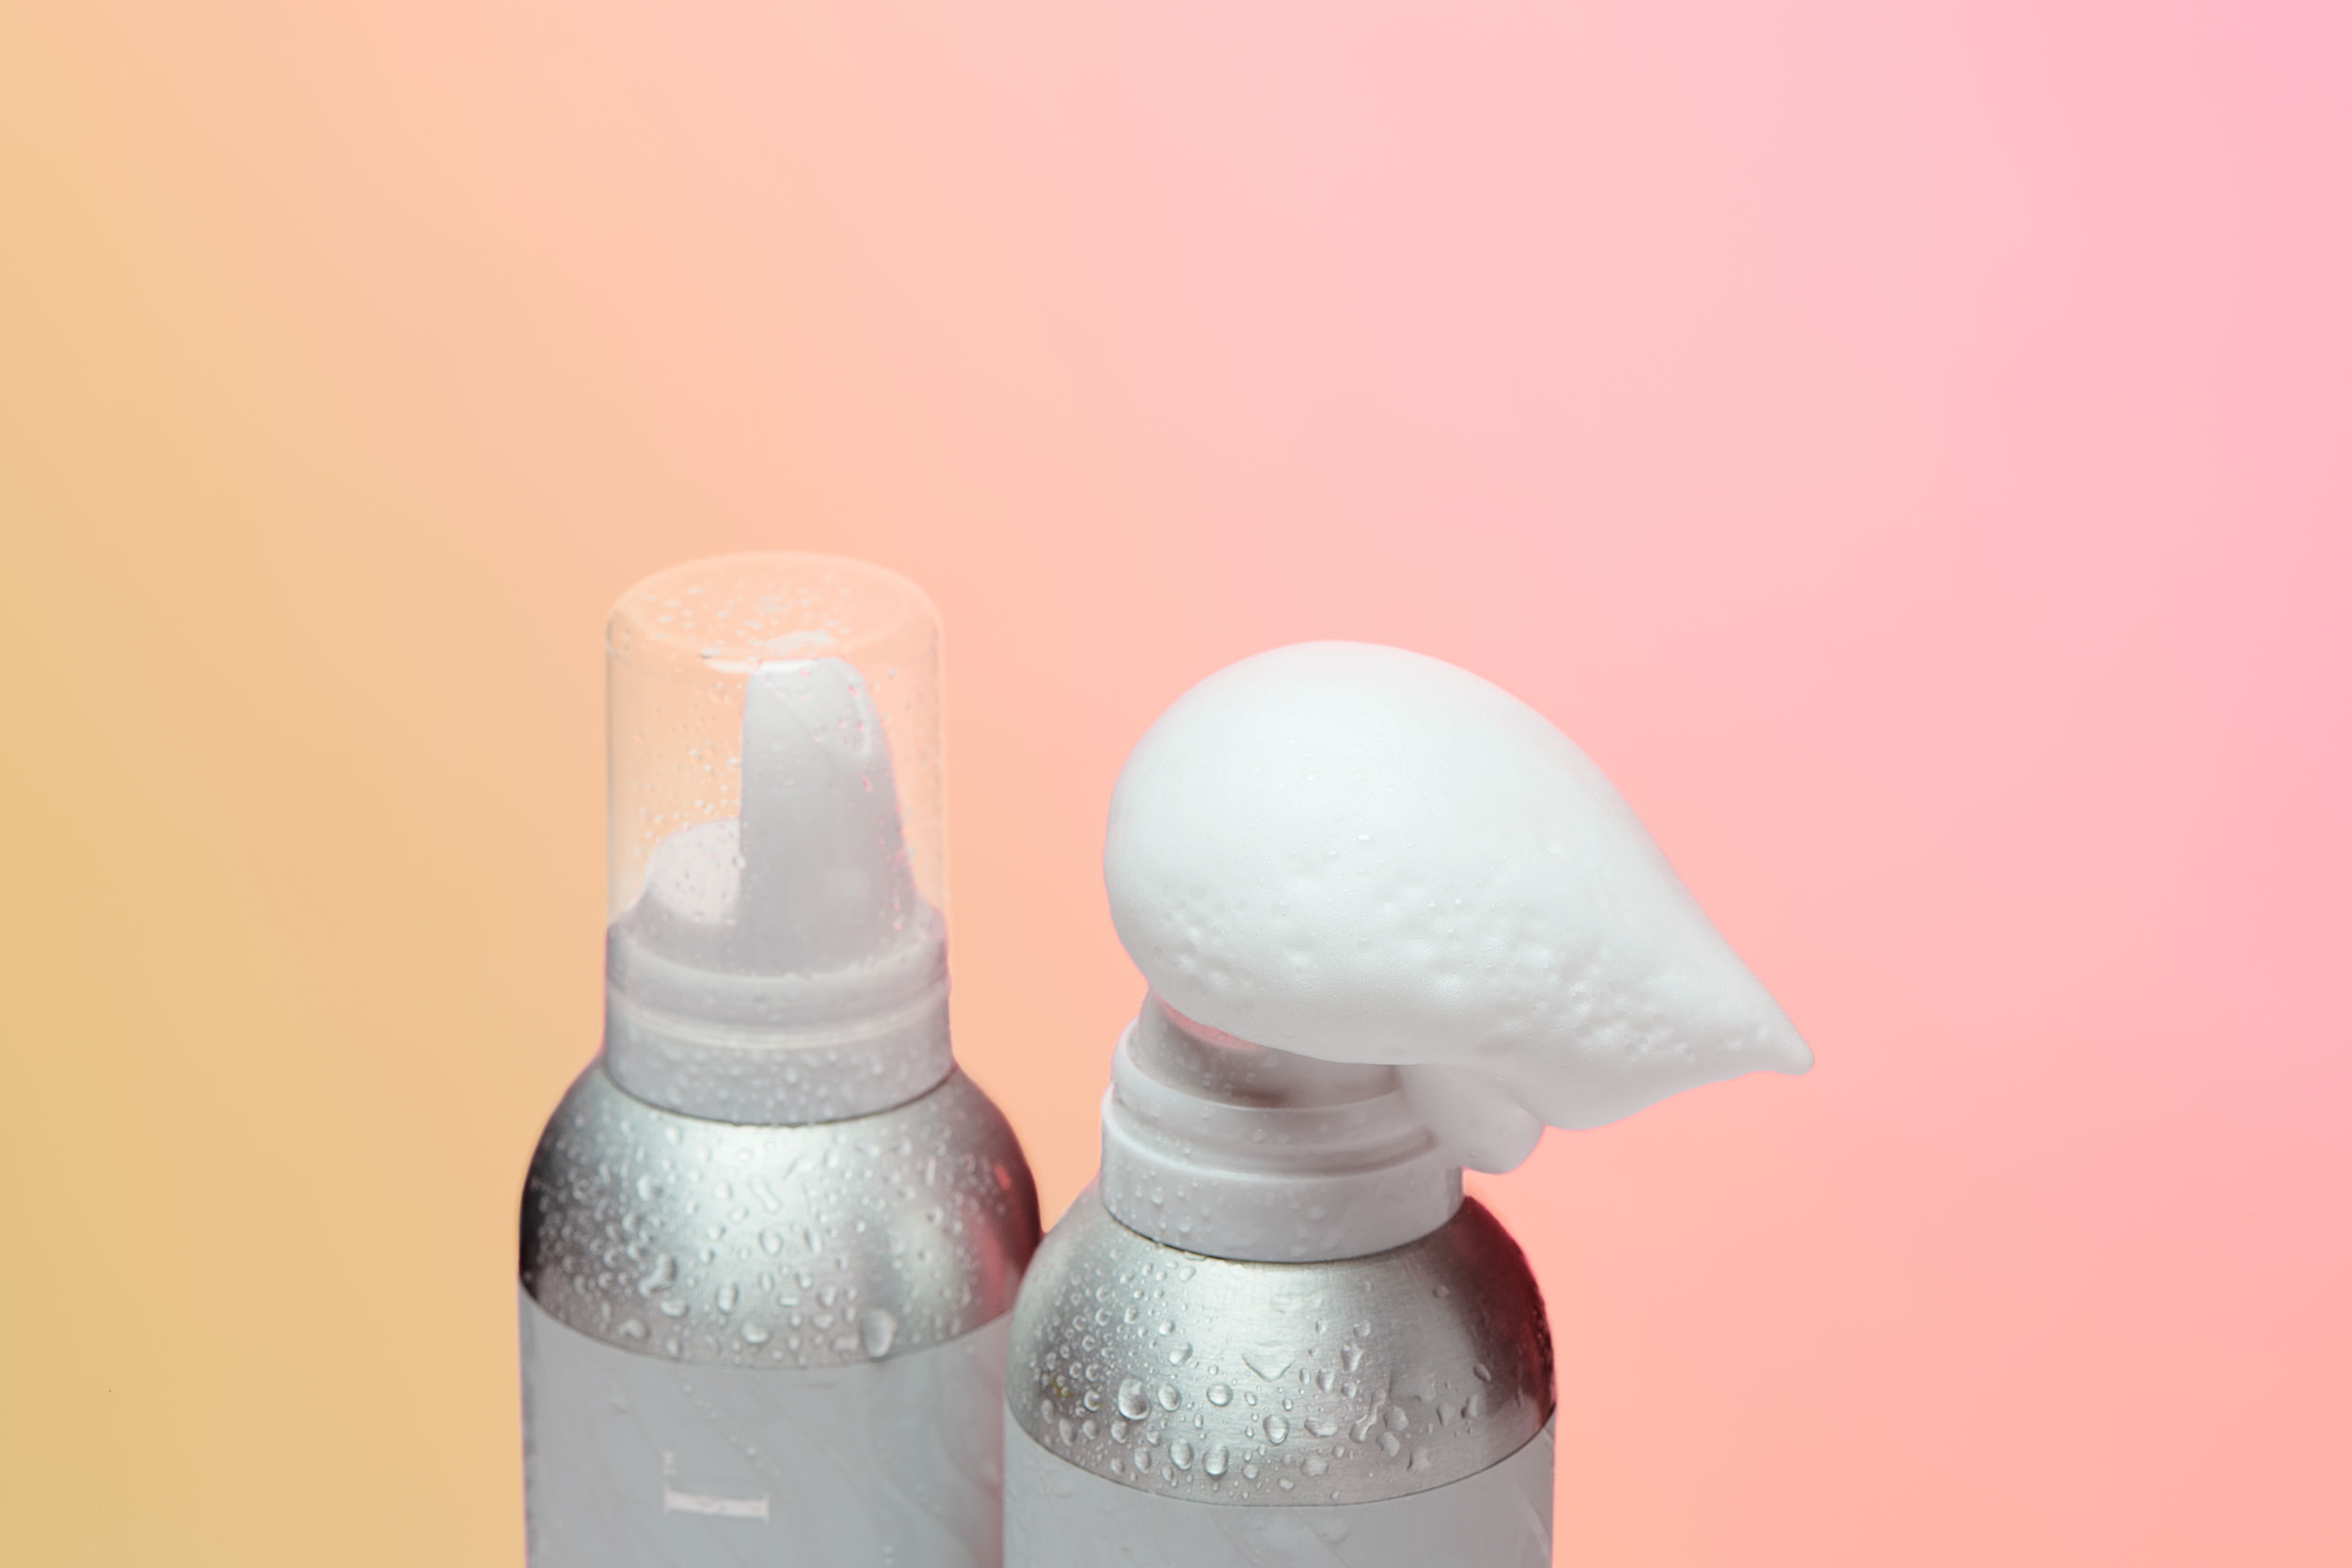 Two volumizing mousse products including one with mousse coming out of its container